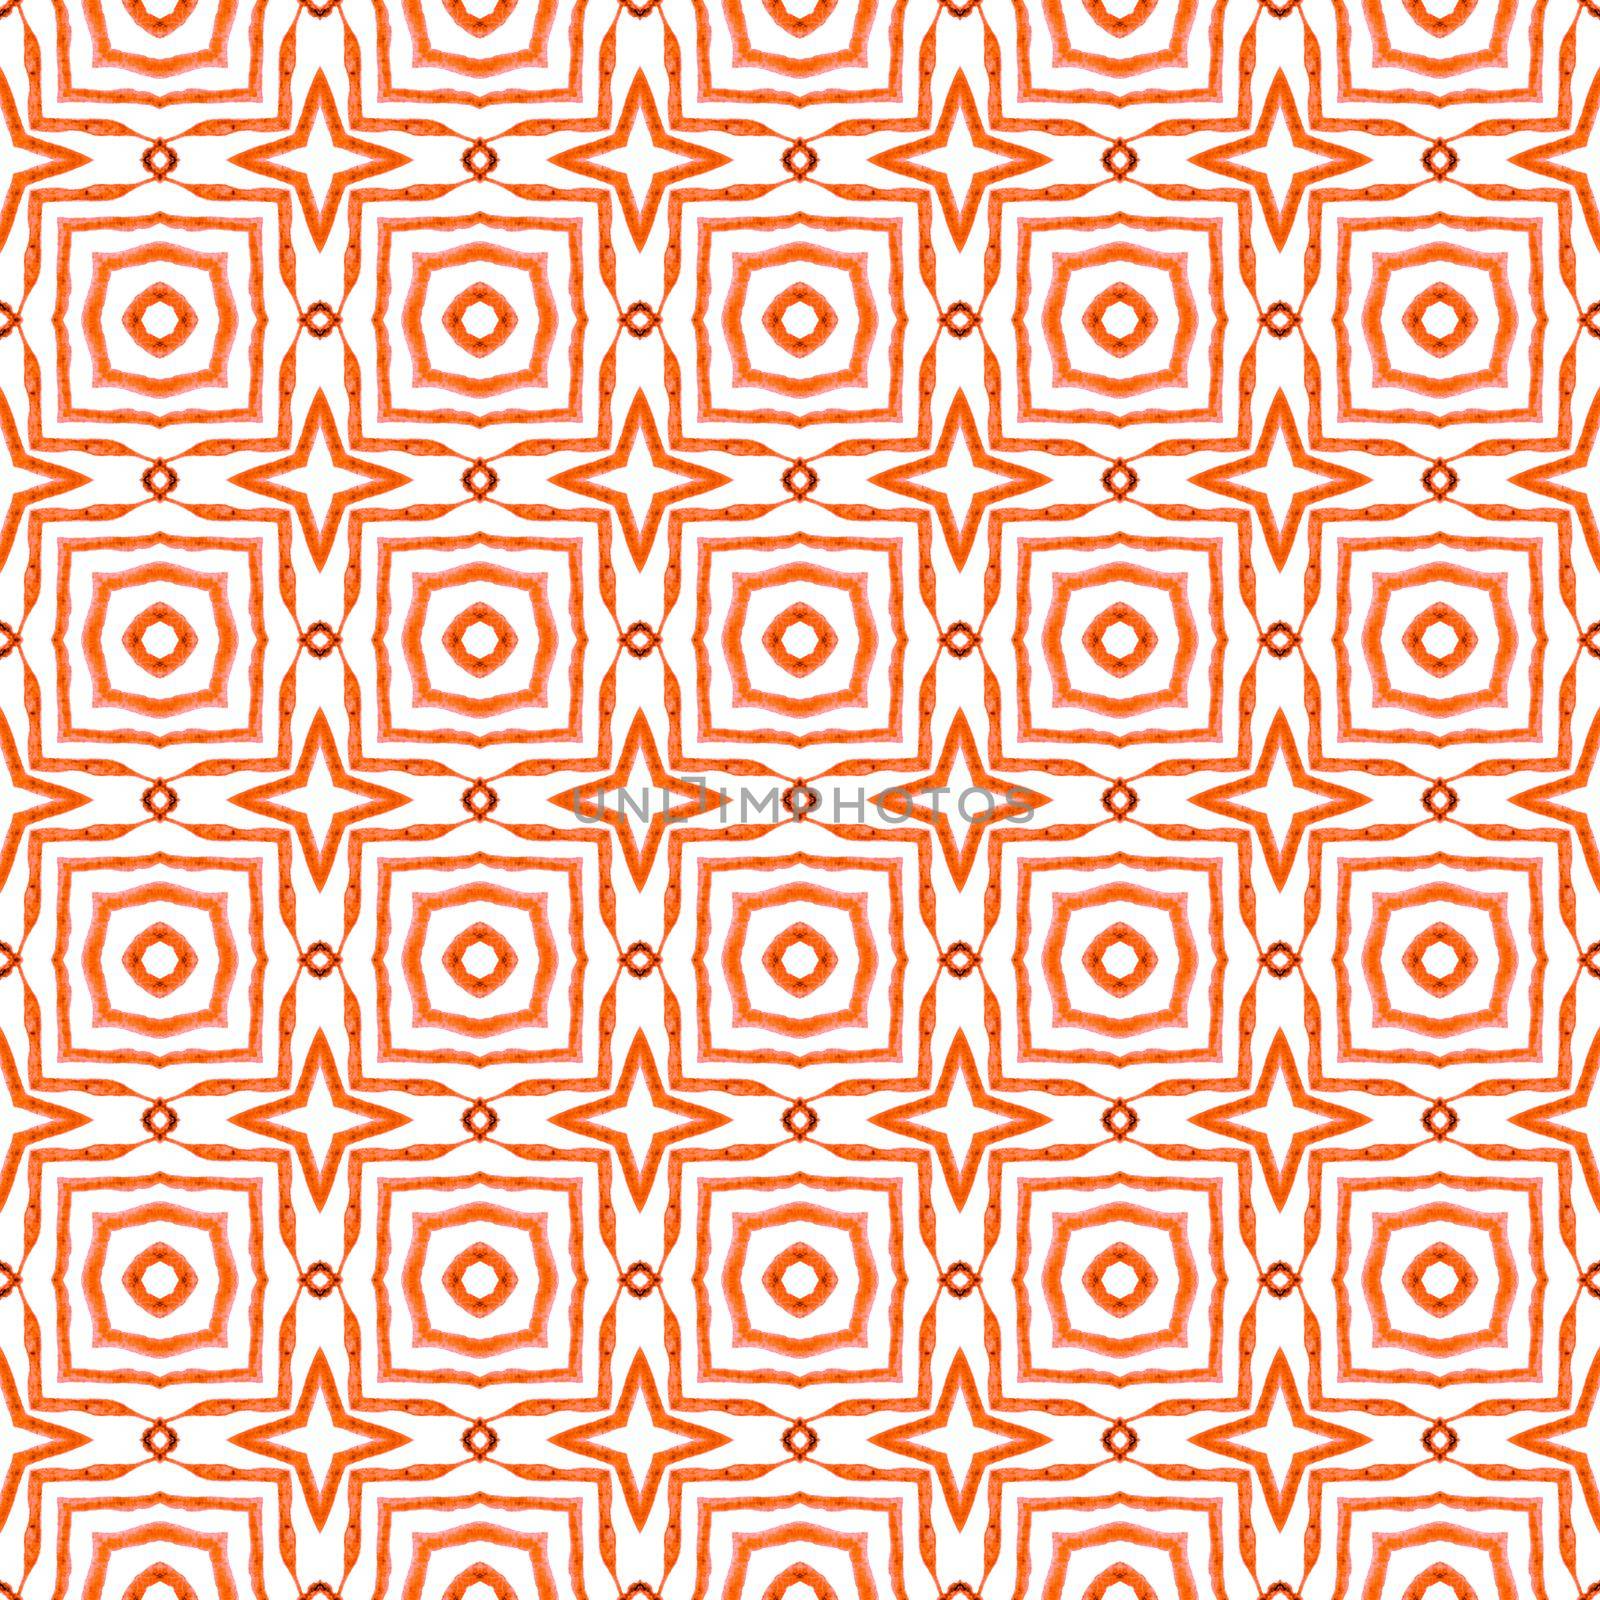 Watercolor summer ethnic border pattern. Orange stunning boho chic summer design. Ethnic hand painted pattern. Textile ready indelible print, swimwear fabric, wallpaper, wrapping.